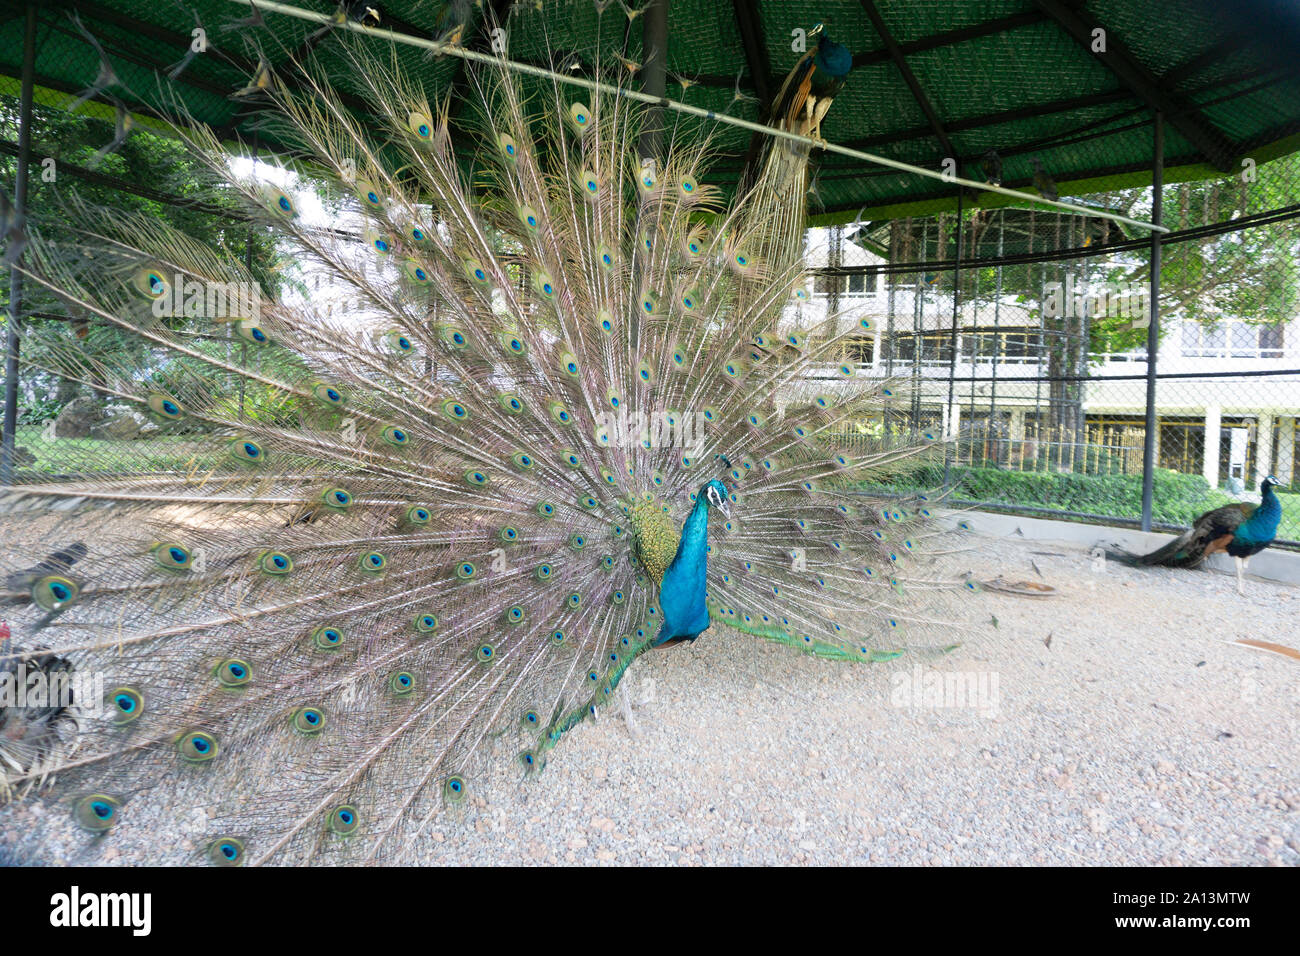 A proud peacock spreading its wings and feathers in an encapsulation cage of a zoo. Stock Photo